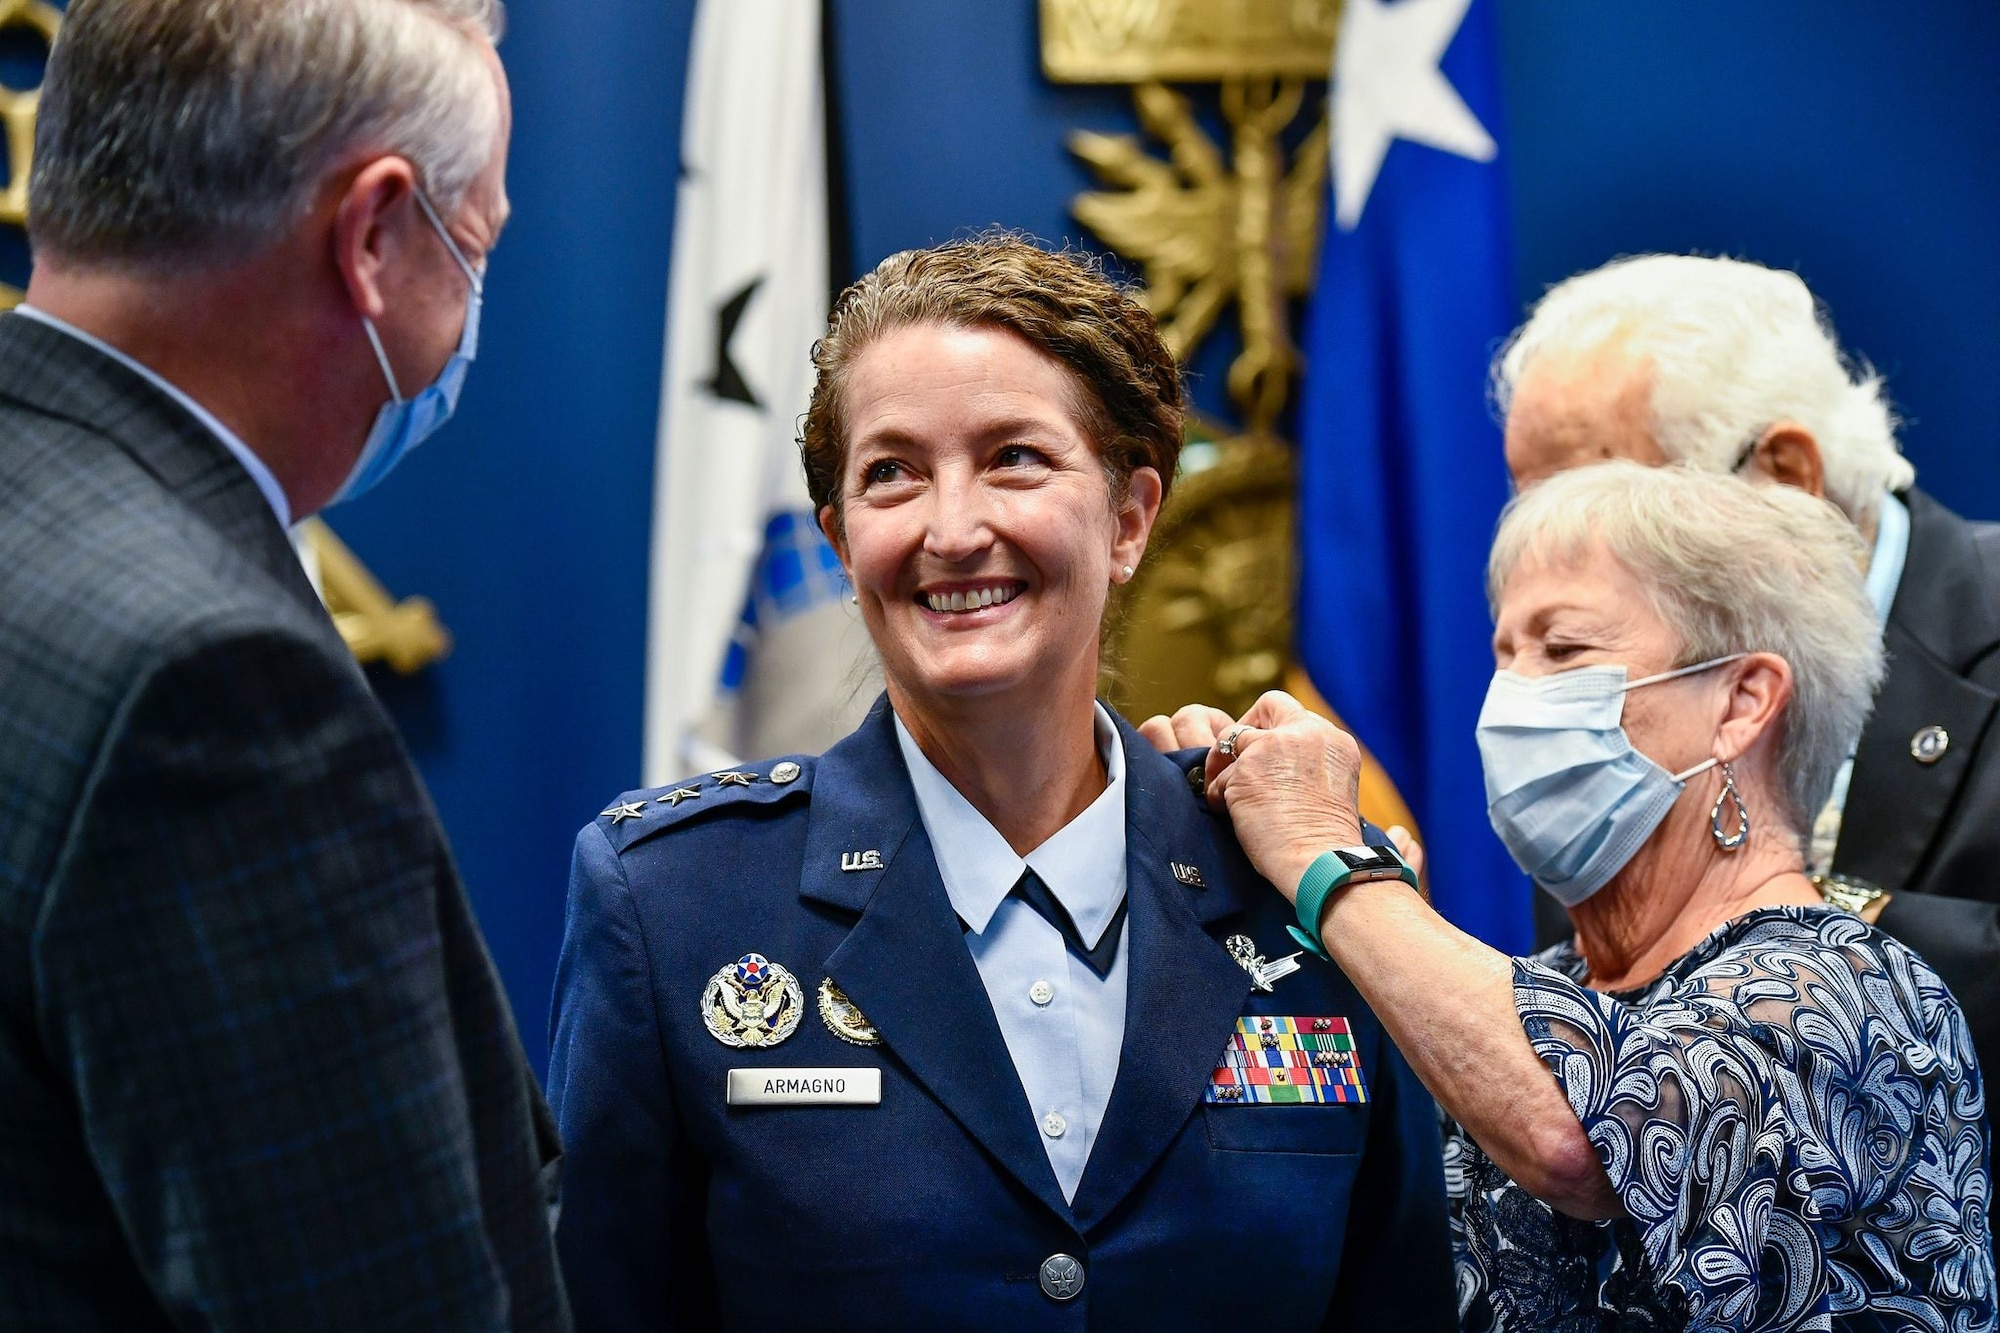 Lt. Gen. Nina M. Armagno has her new rank pinned on by her family during her promotion ceremony at the Pentagon, Arlington, Va., Aug. 17, 2020. Armagno transferred from the Air Force to Space Force during the ceremony. (U.S Air Force photo by Eric Dietrich)